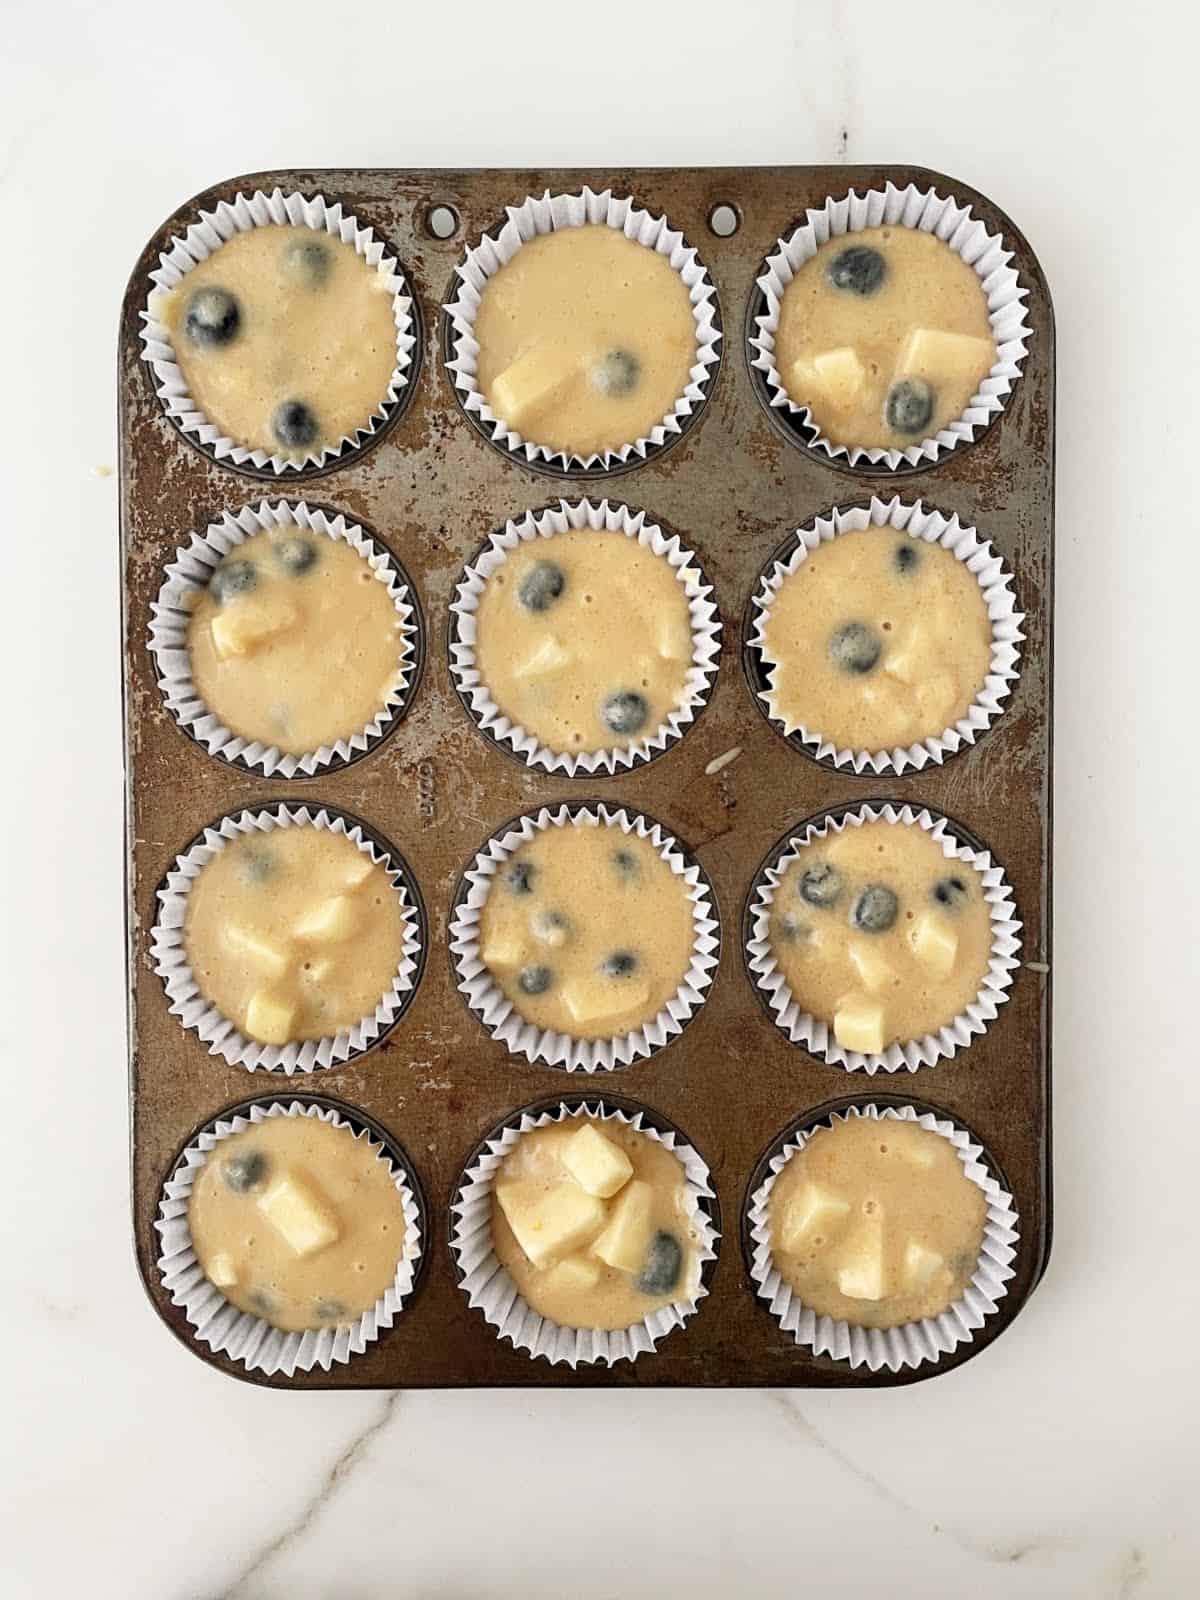 Blueberry apple muffins batter in paper cups in a metal muffin pan. White marble surface. Top view.